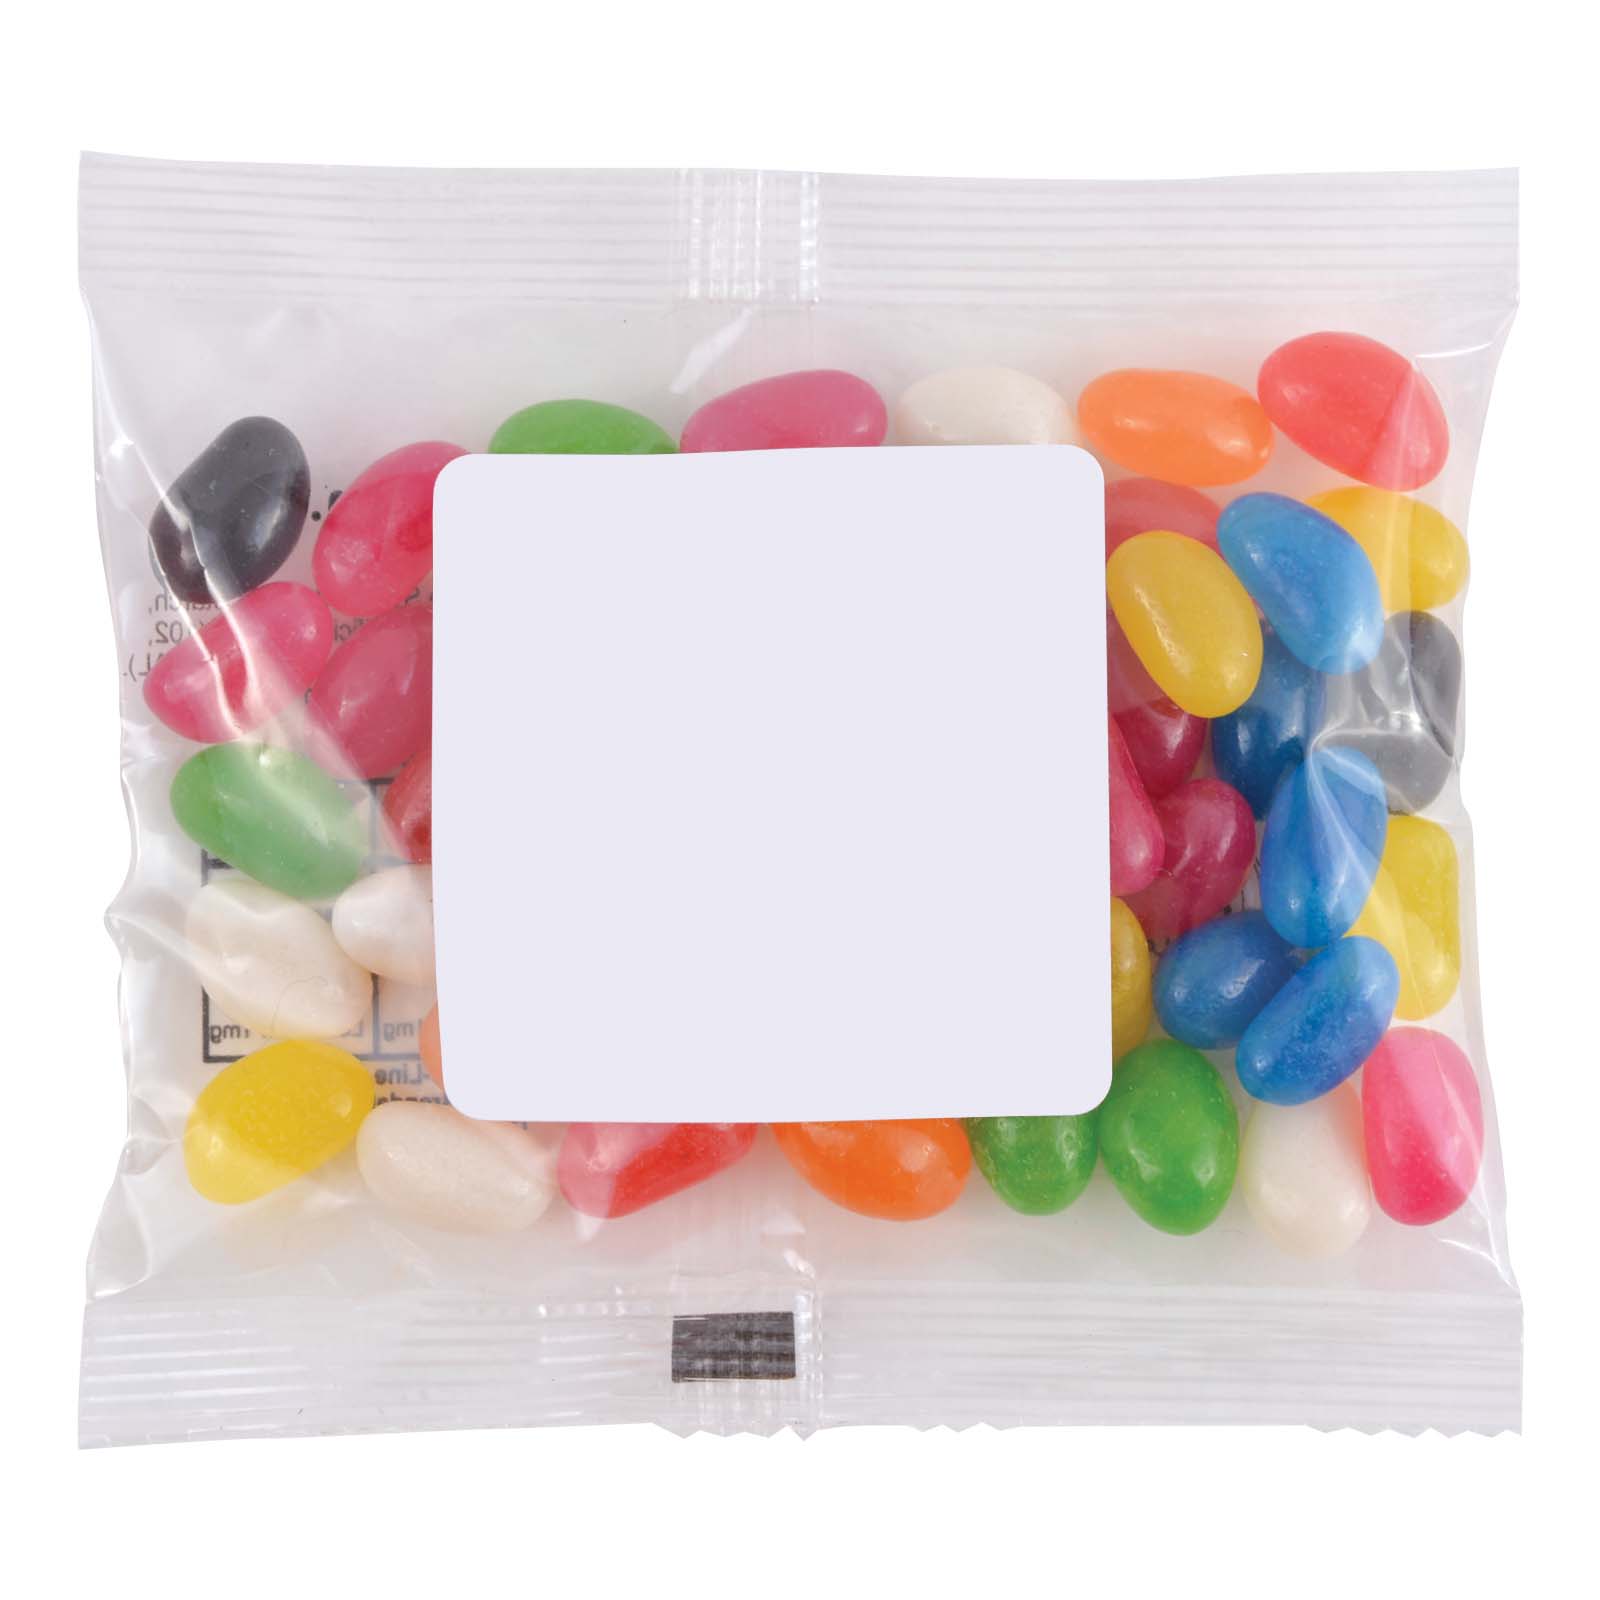 Confectionery Assorted Colour Mini Jelly Beans in 50 Gram Cello Bag with Rush Production Express